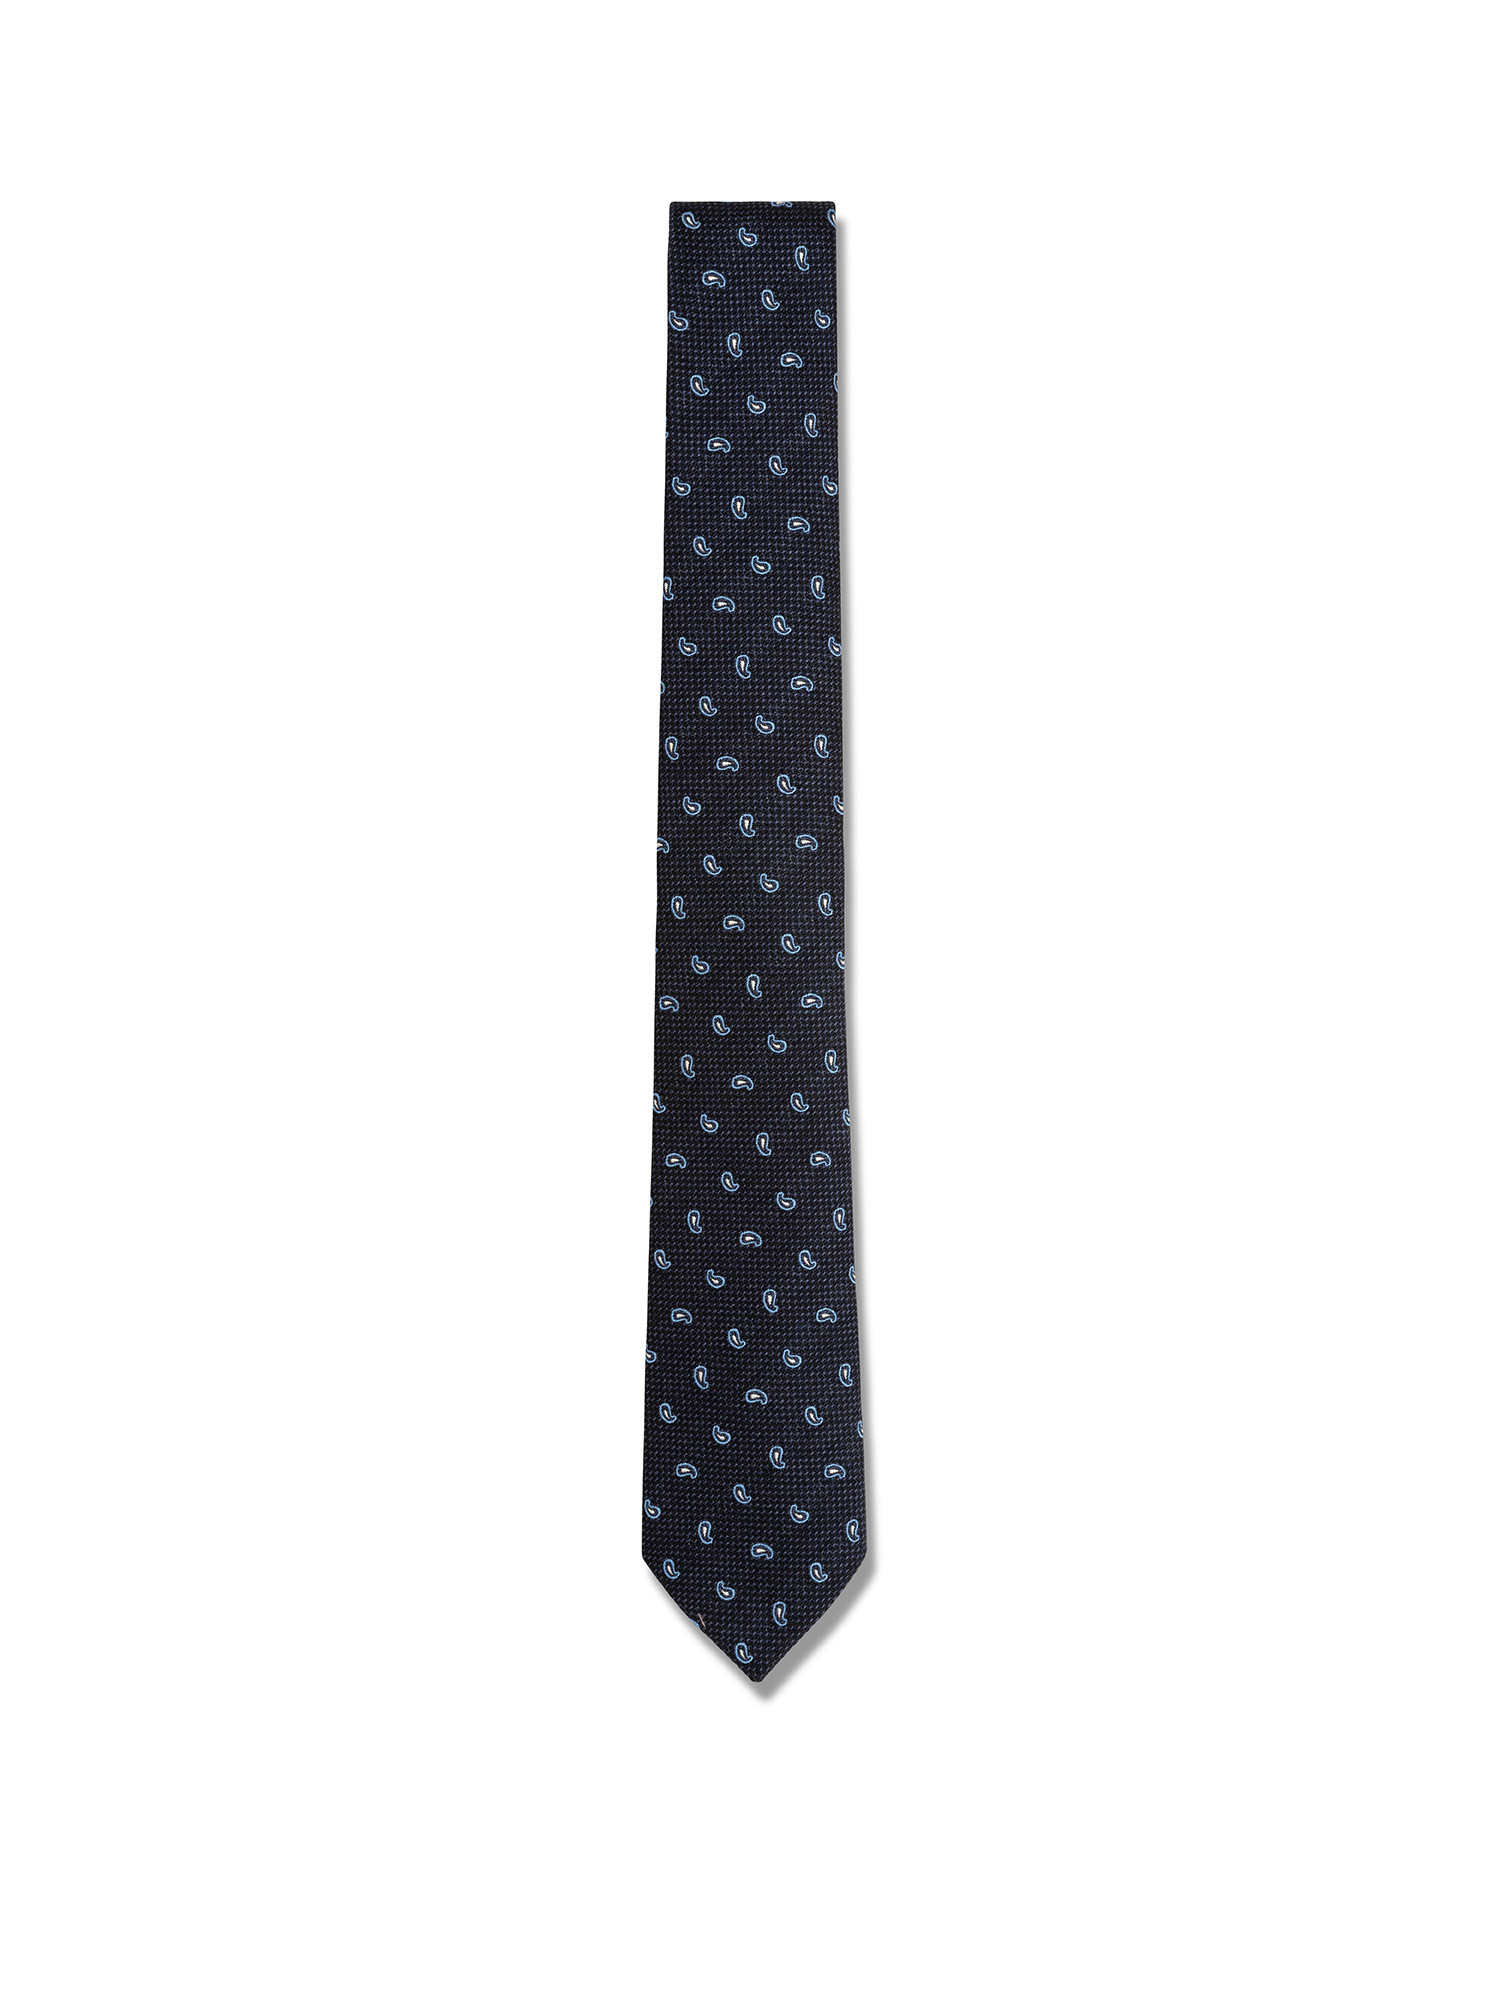 Luca D'Altieri - Patterned silk and cotton tie, Blue, large image number 1